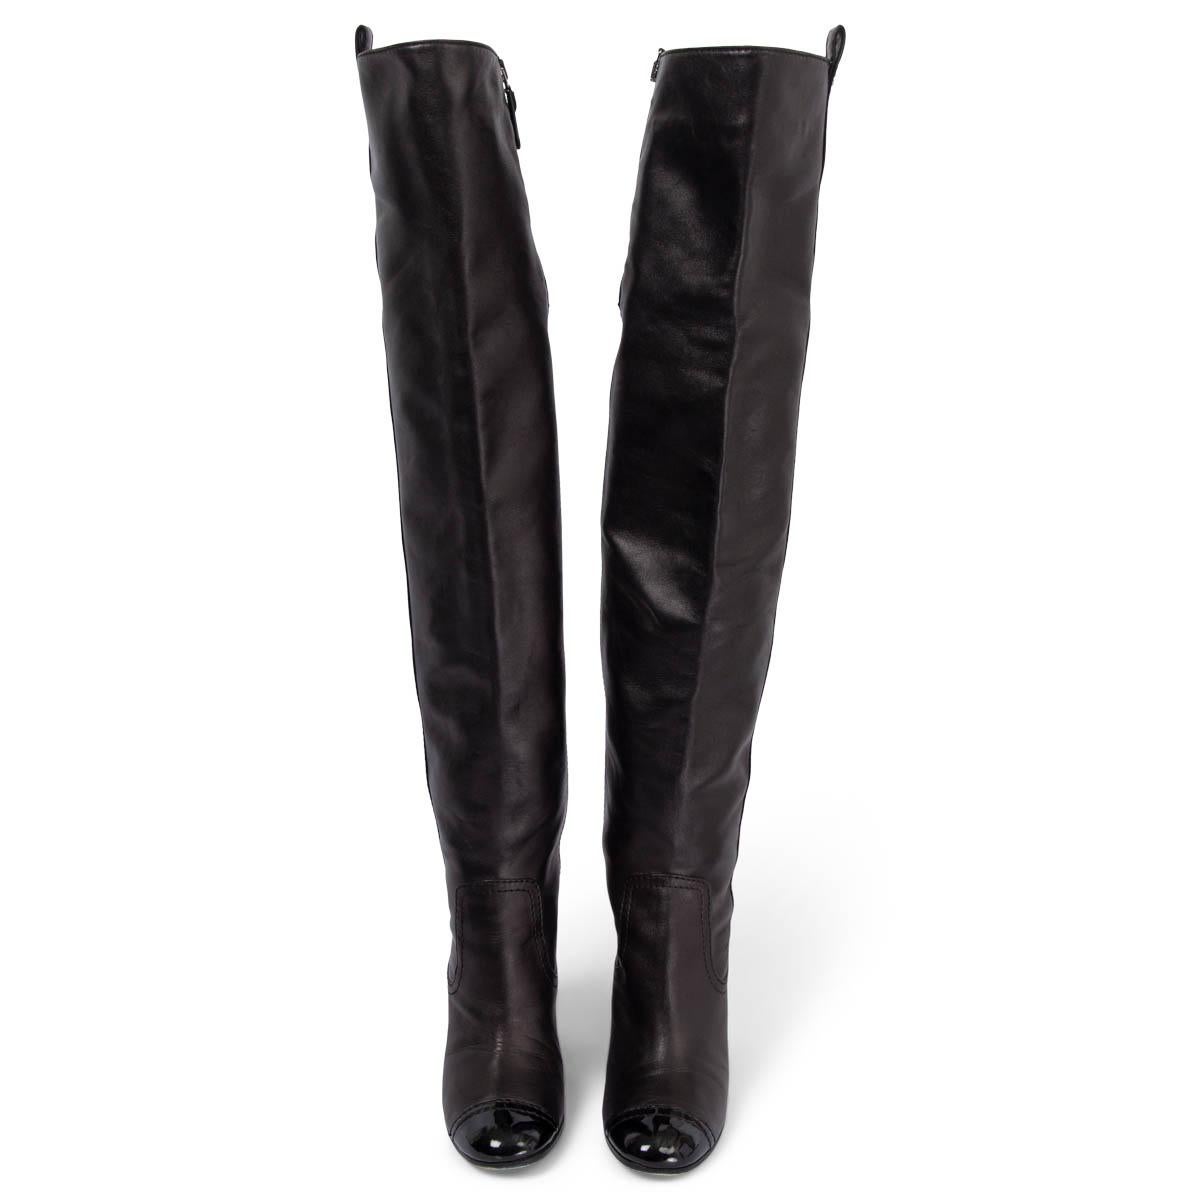 100% authentic Chanel over-knee boots in black smooth lambskin leather with signature patent toe tip. Open with a zipper to a light beige satin lining. Have been worn and show some scuffs along the zipper. Overall in very good condition.